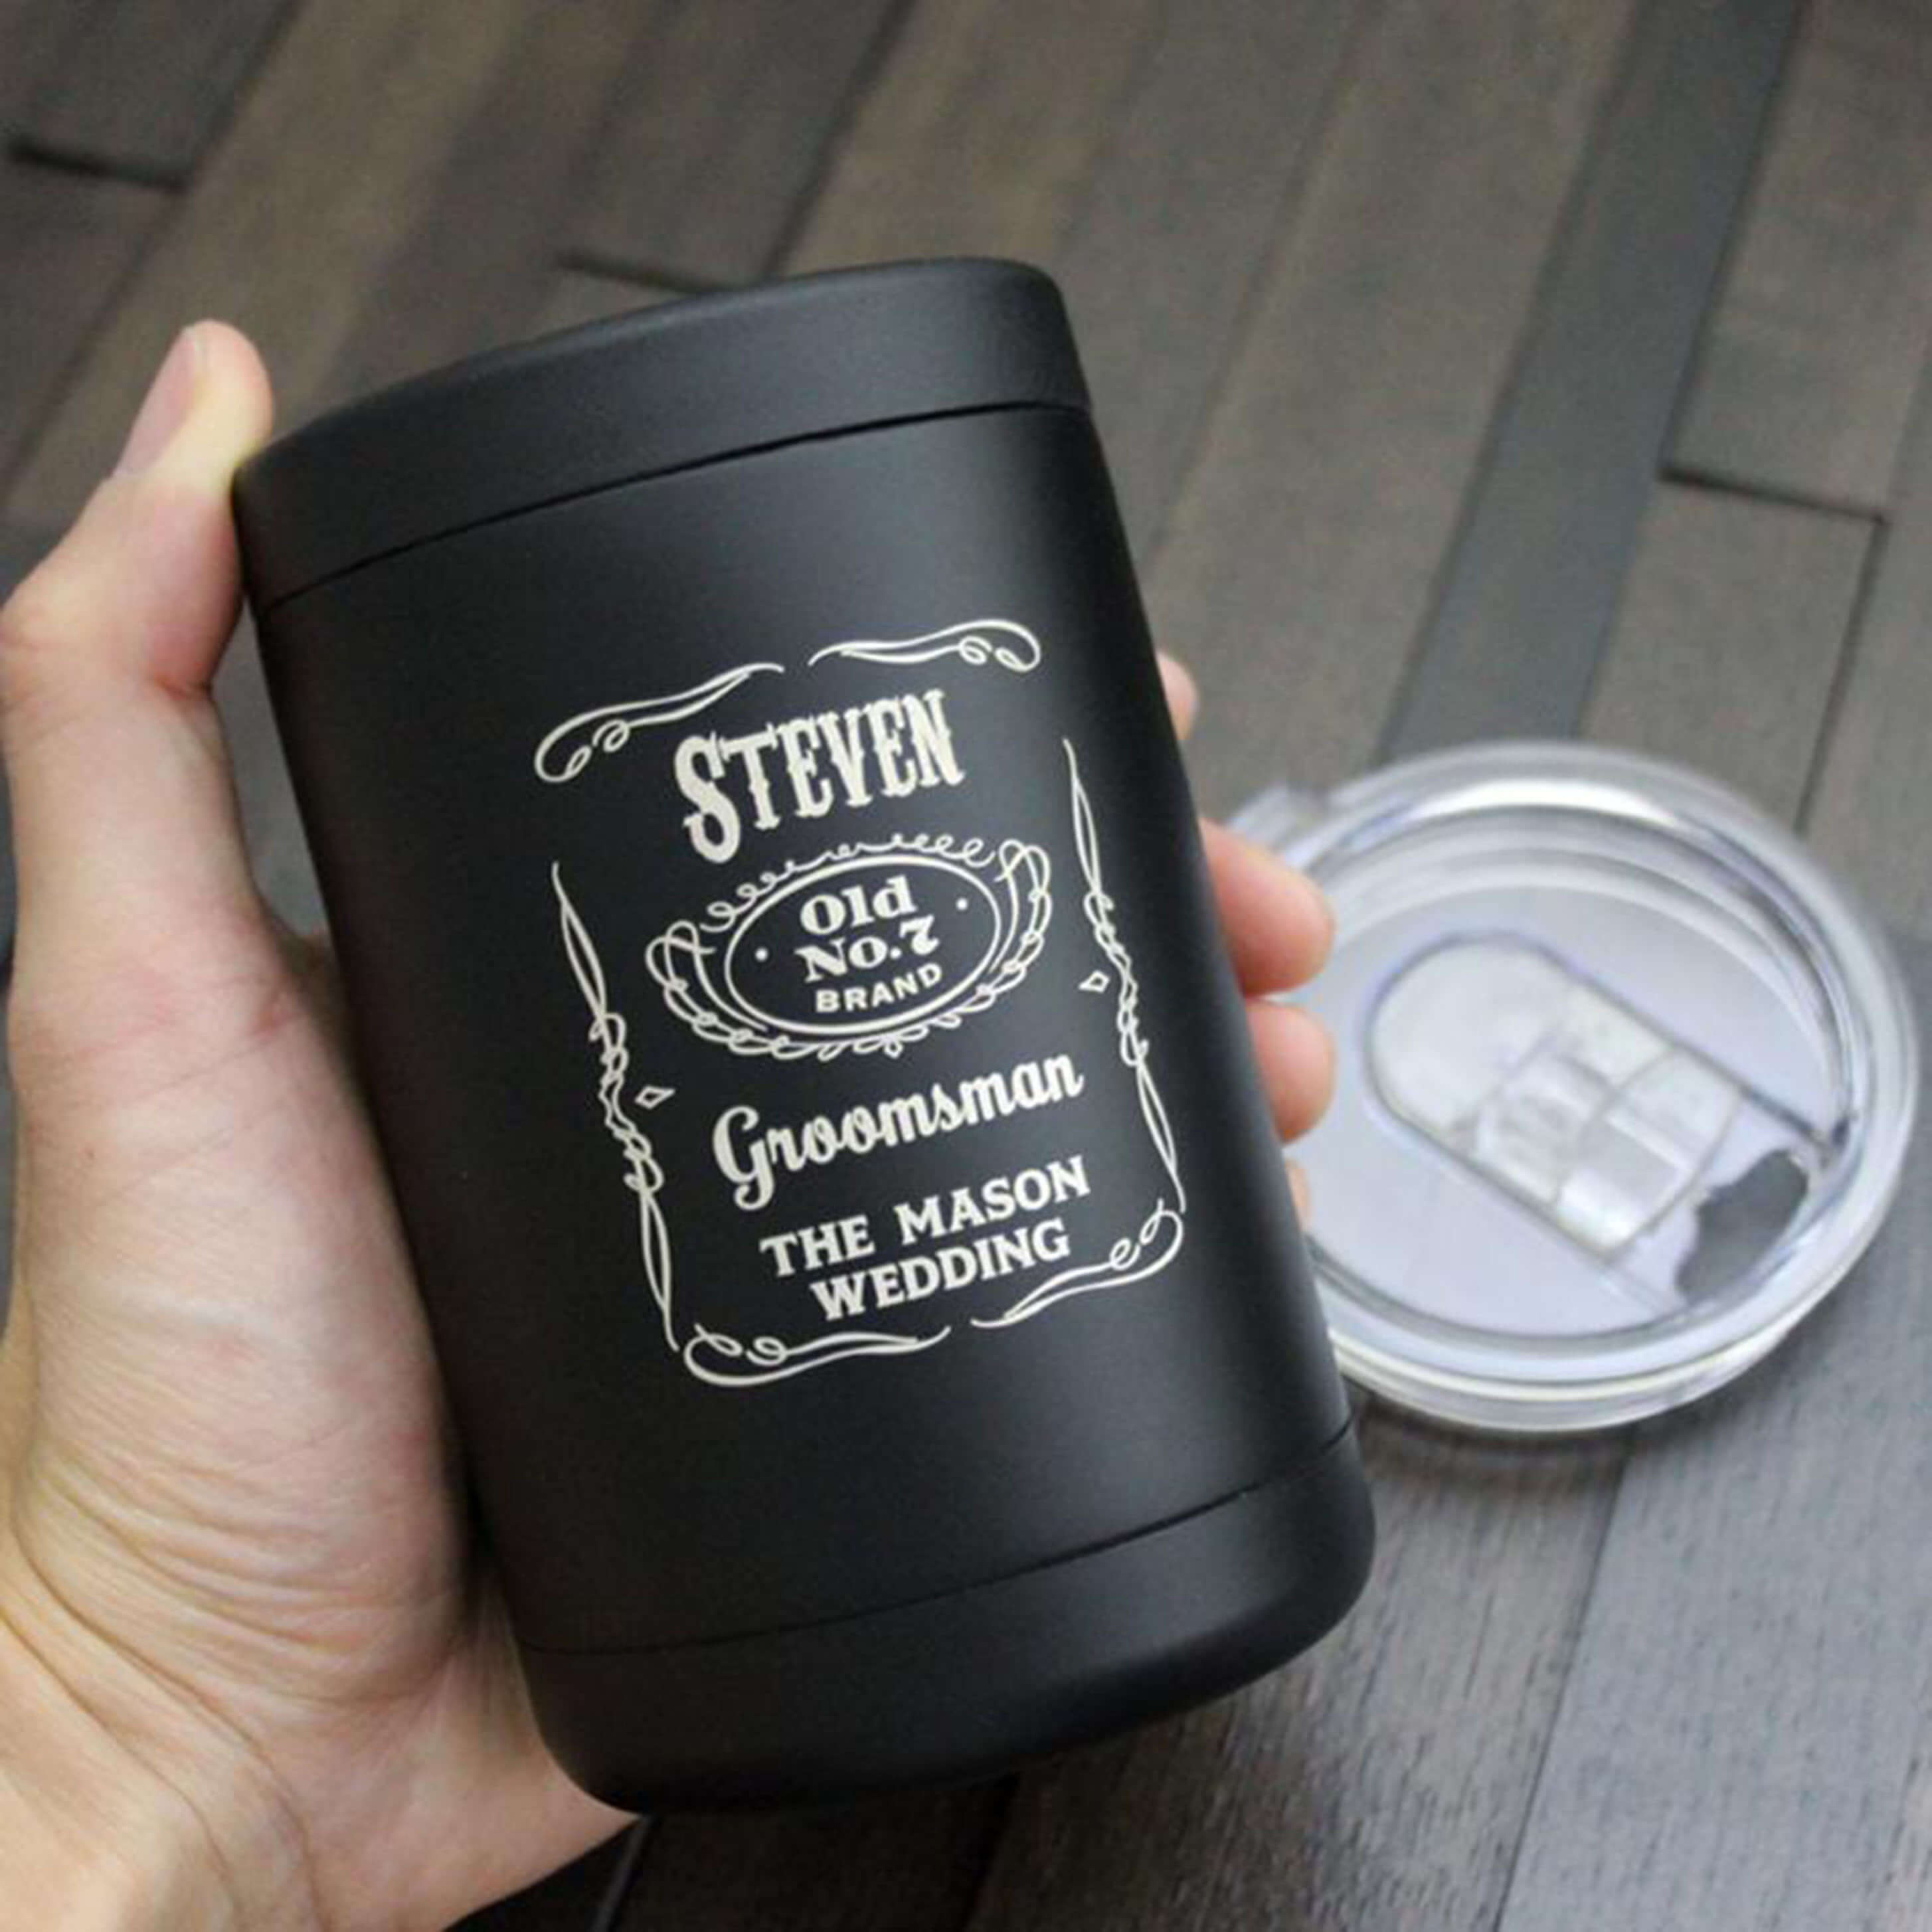 Bulk Custom Engraved Stainless Steel Can Coolers with Logo